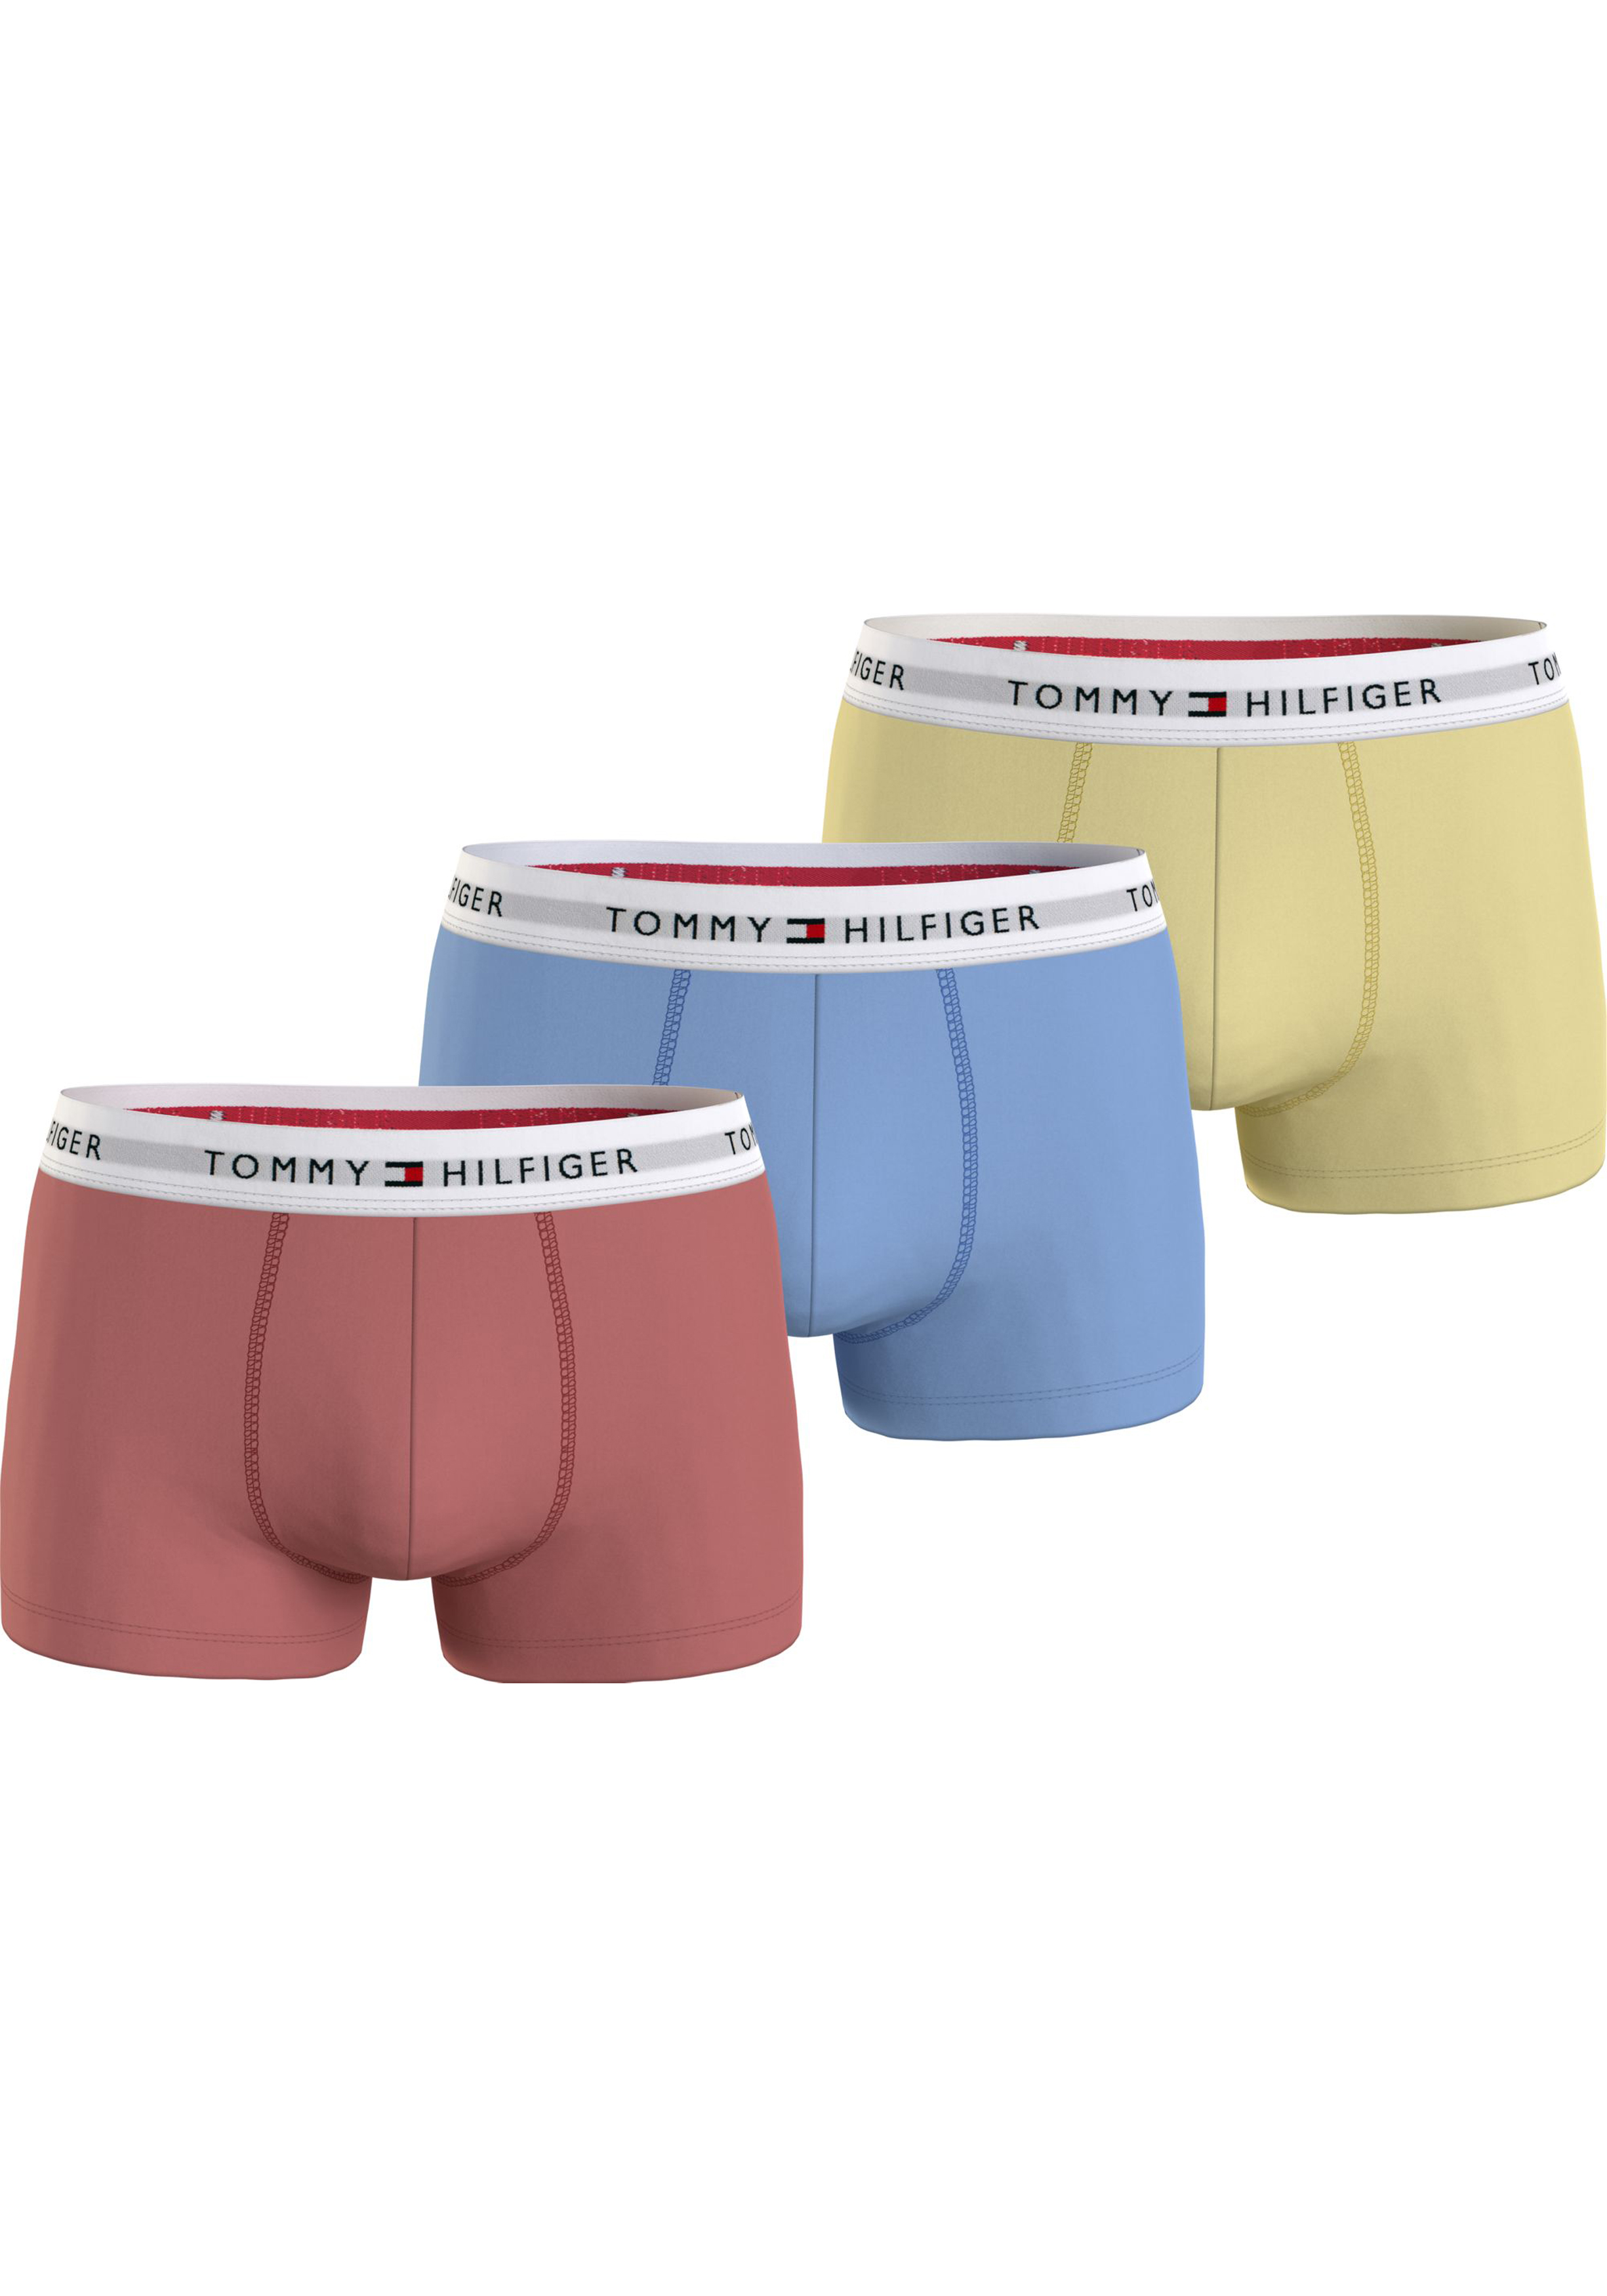 Tommy Hilfiger trunk (3-pack), heren boxers normale lengte, oudroze, lichtblauw, geel